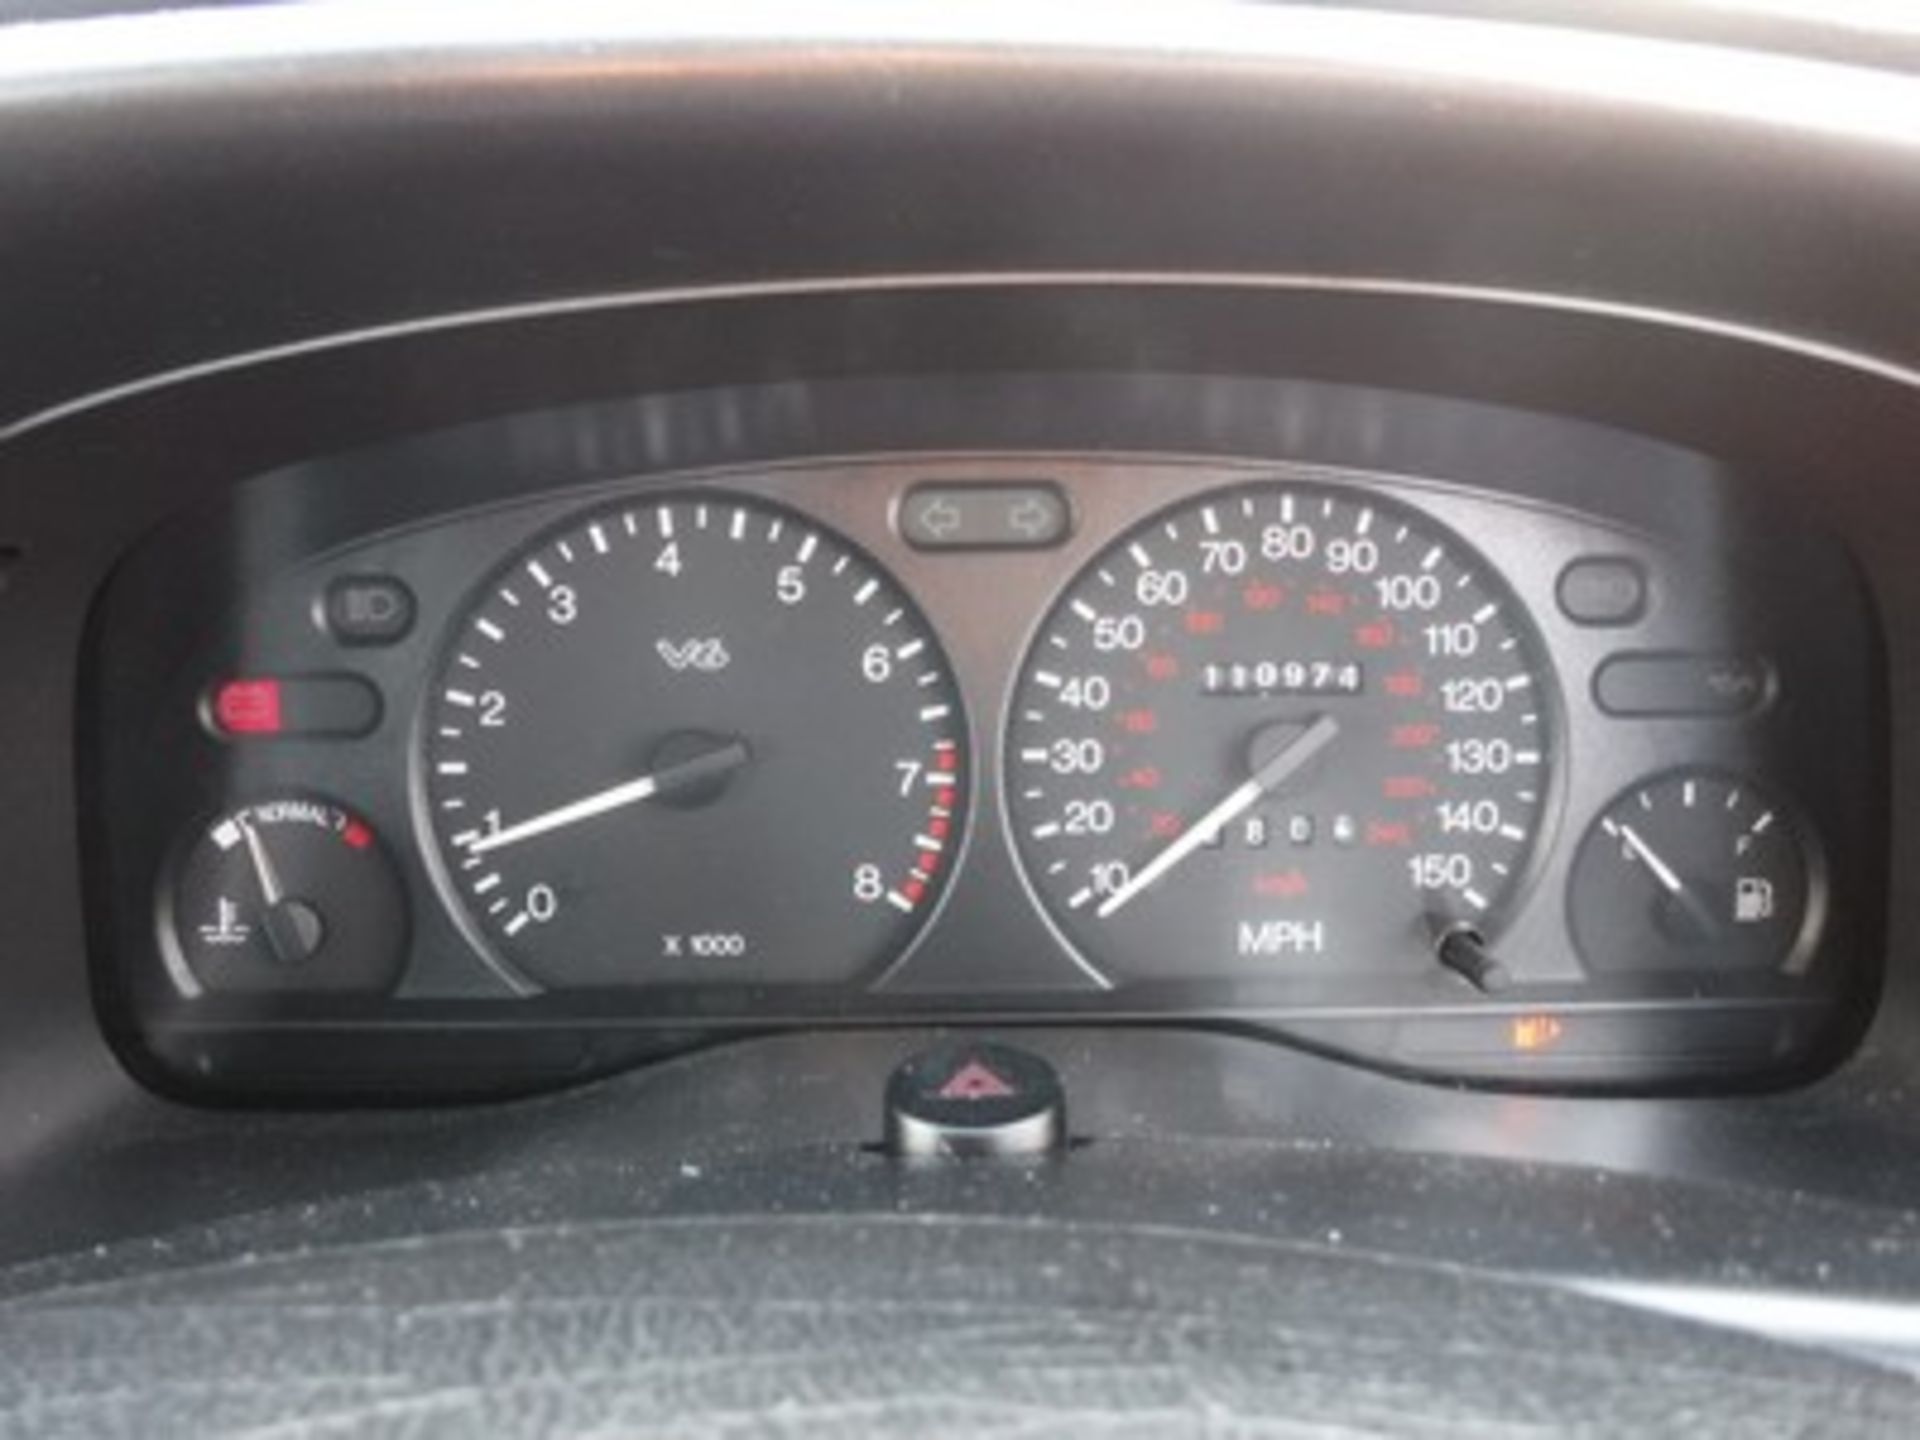 FORD MONDEO ST 24 V6 - 2497cc - Image 3 of 24